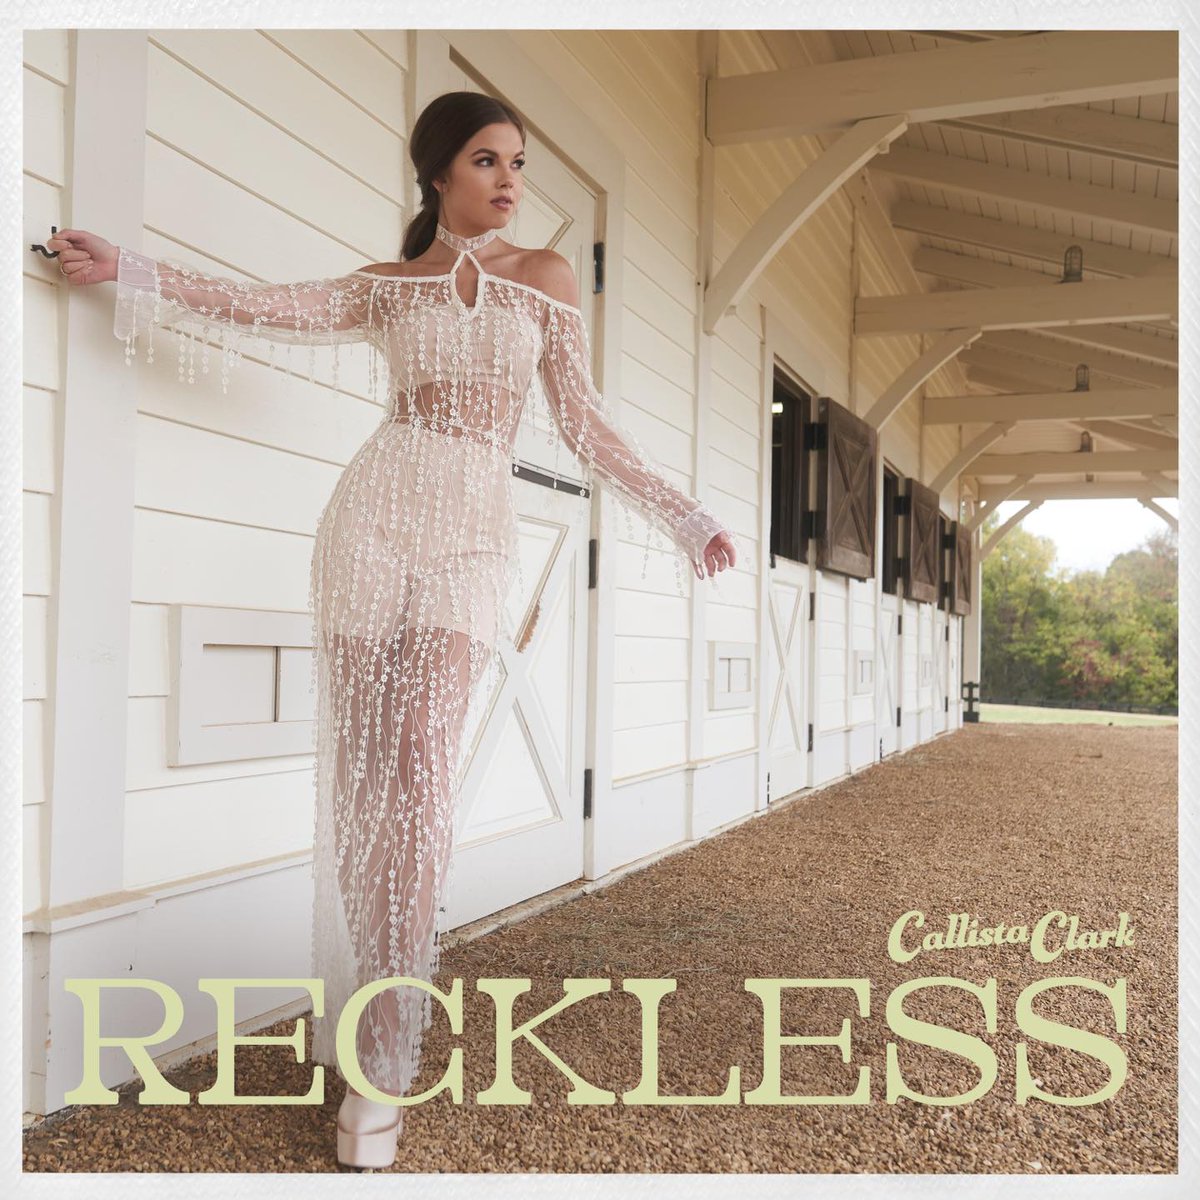 'Reckless' is the new single out from @callistaclark. @LesleyHastings shares her thoughts on the single here - countrylowdown.com/2024/04/16/cal… #NewMusic #NewMusicAlert #NewMusic2024 #countrylowdown